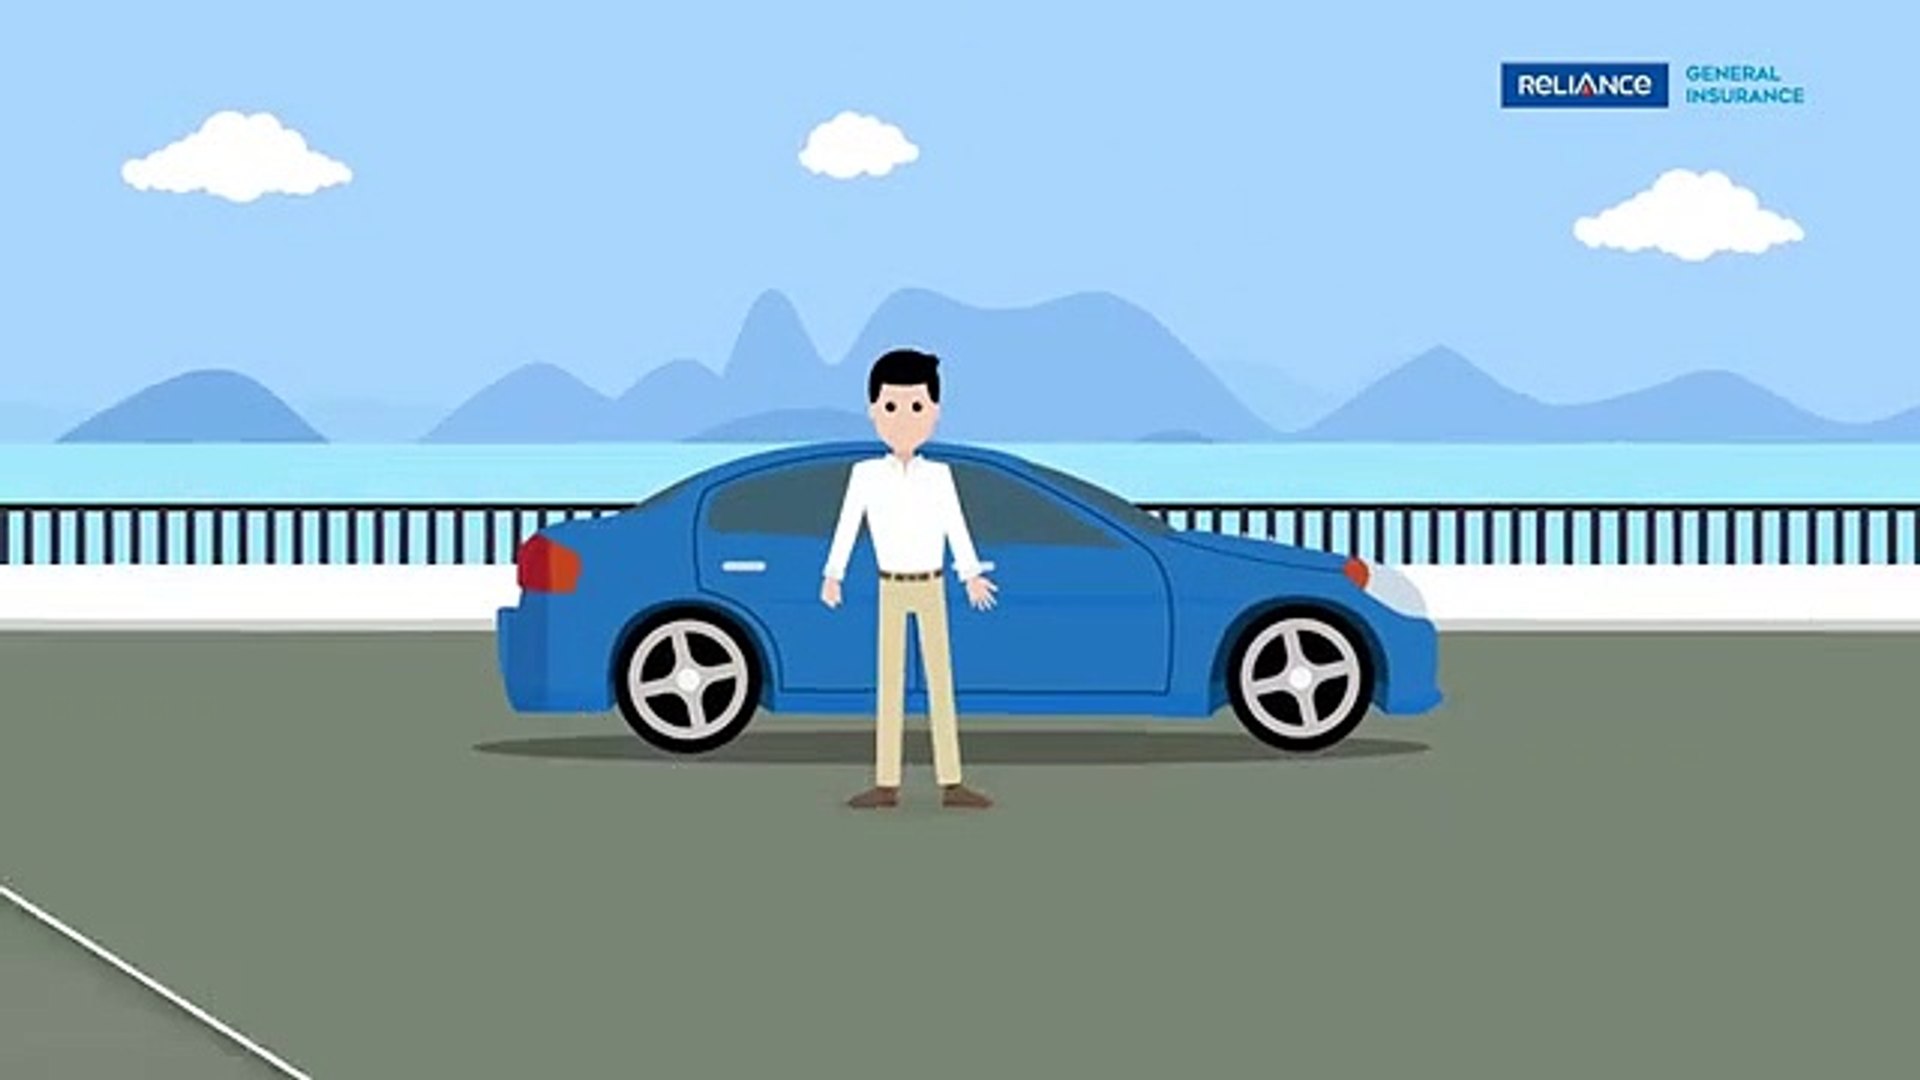 How To Care For Your Car During Road Trips Car Insurance Basics By Reliance General Insurance Video Dailymotion